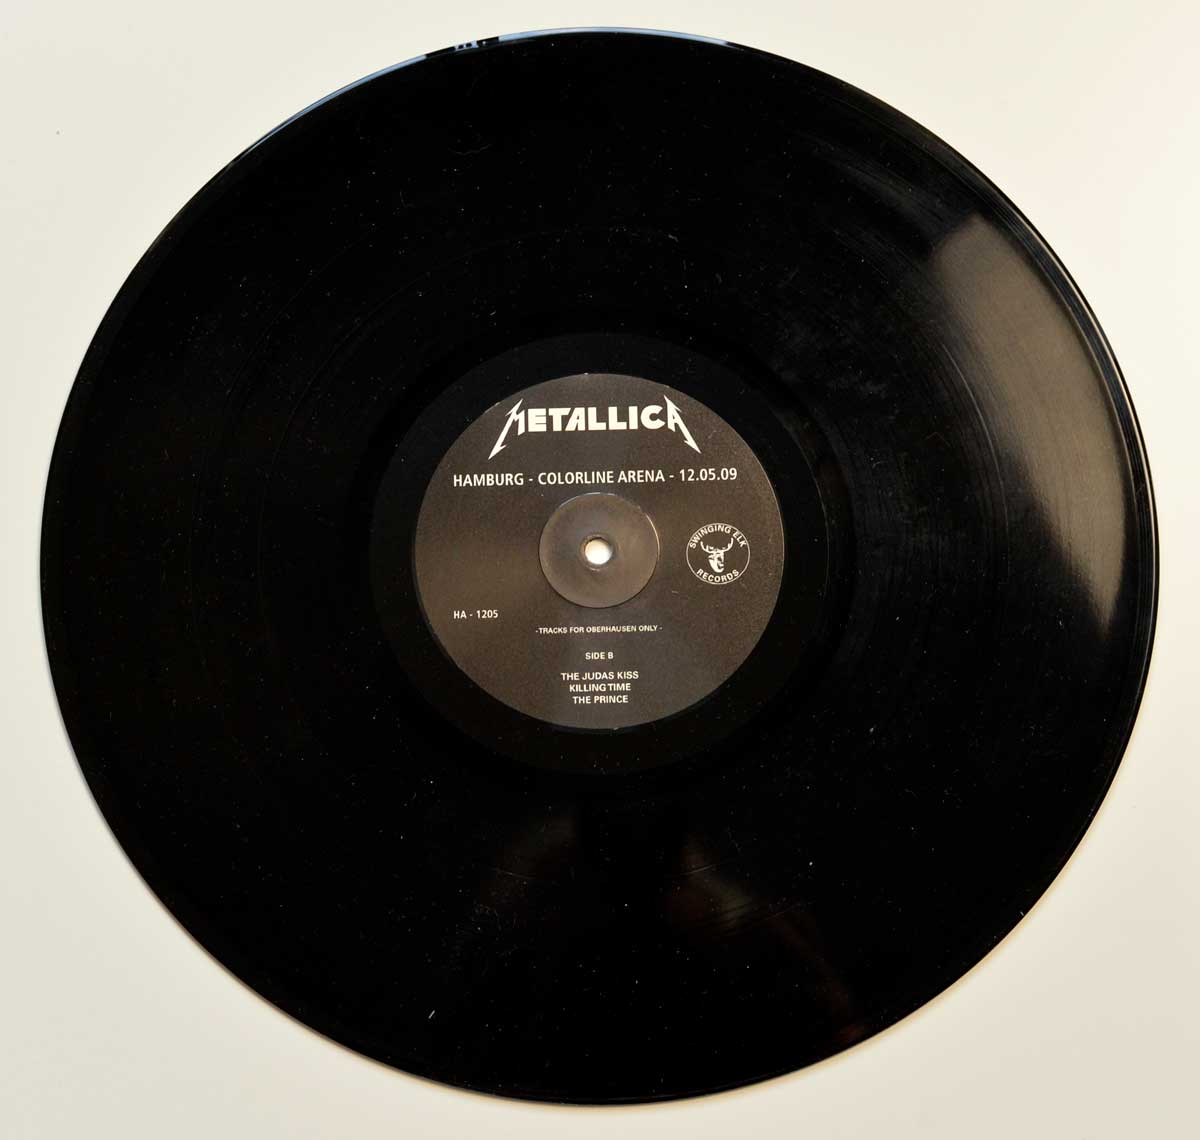 Photo of record side two of METALLICA - Hamburg Colorline 12 May 2009 